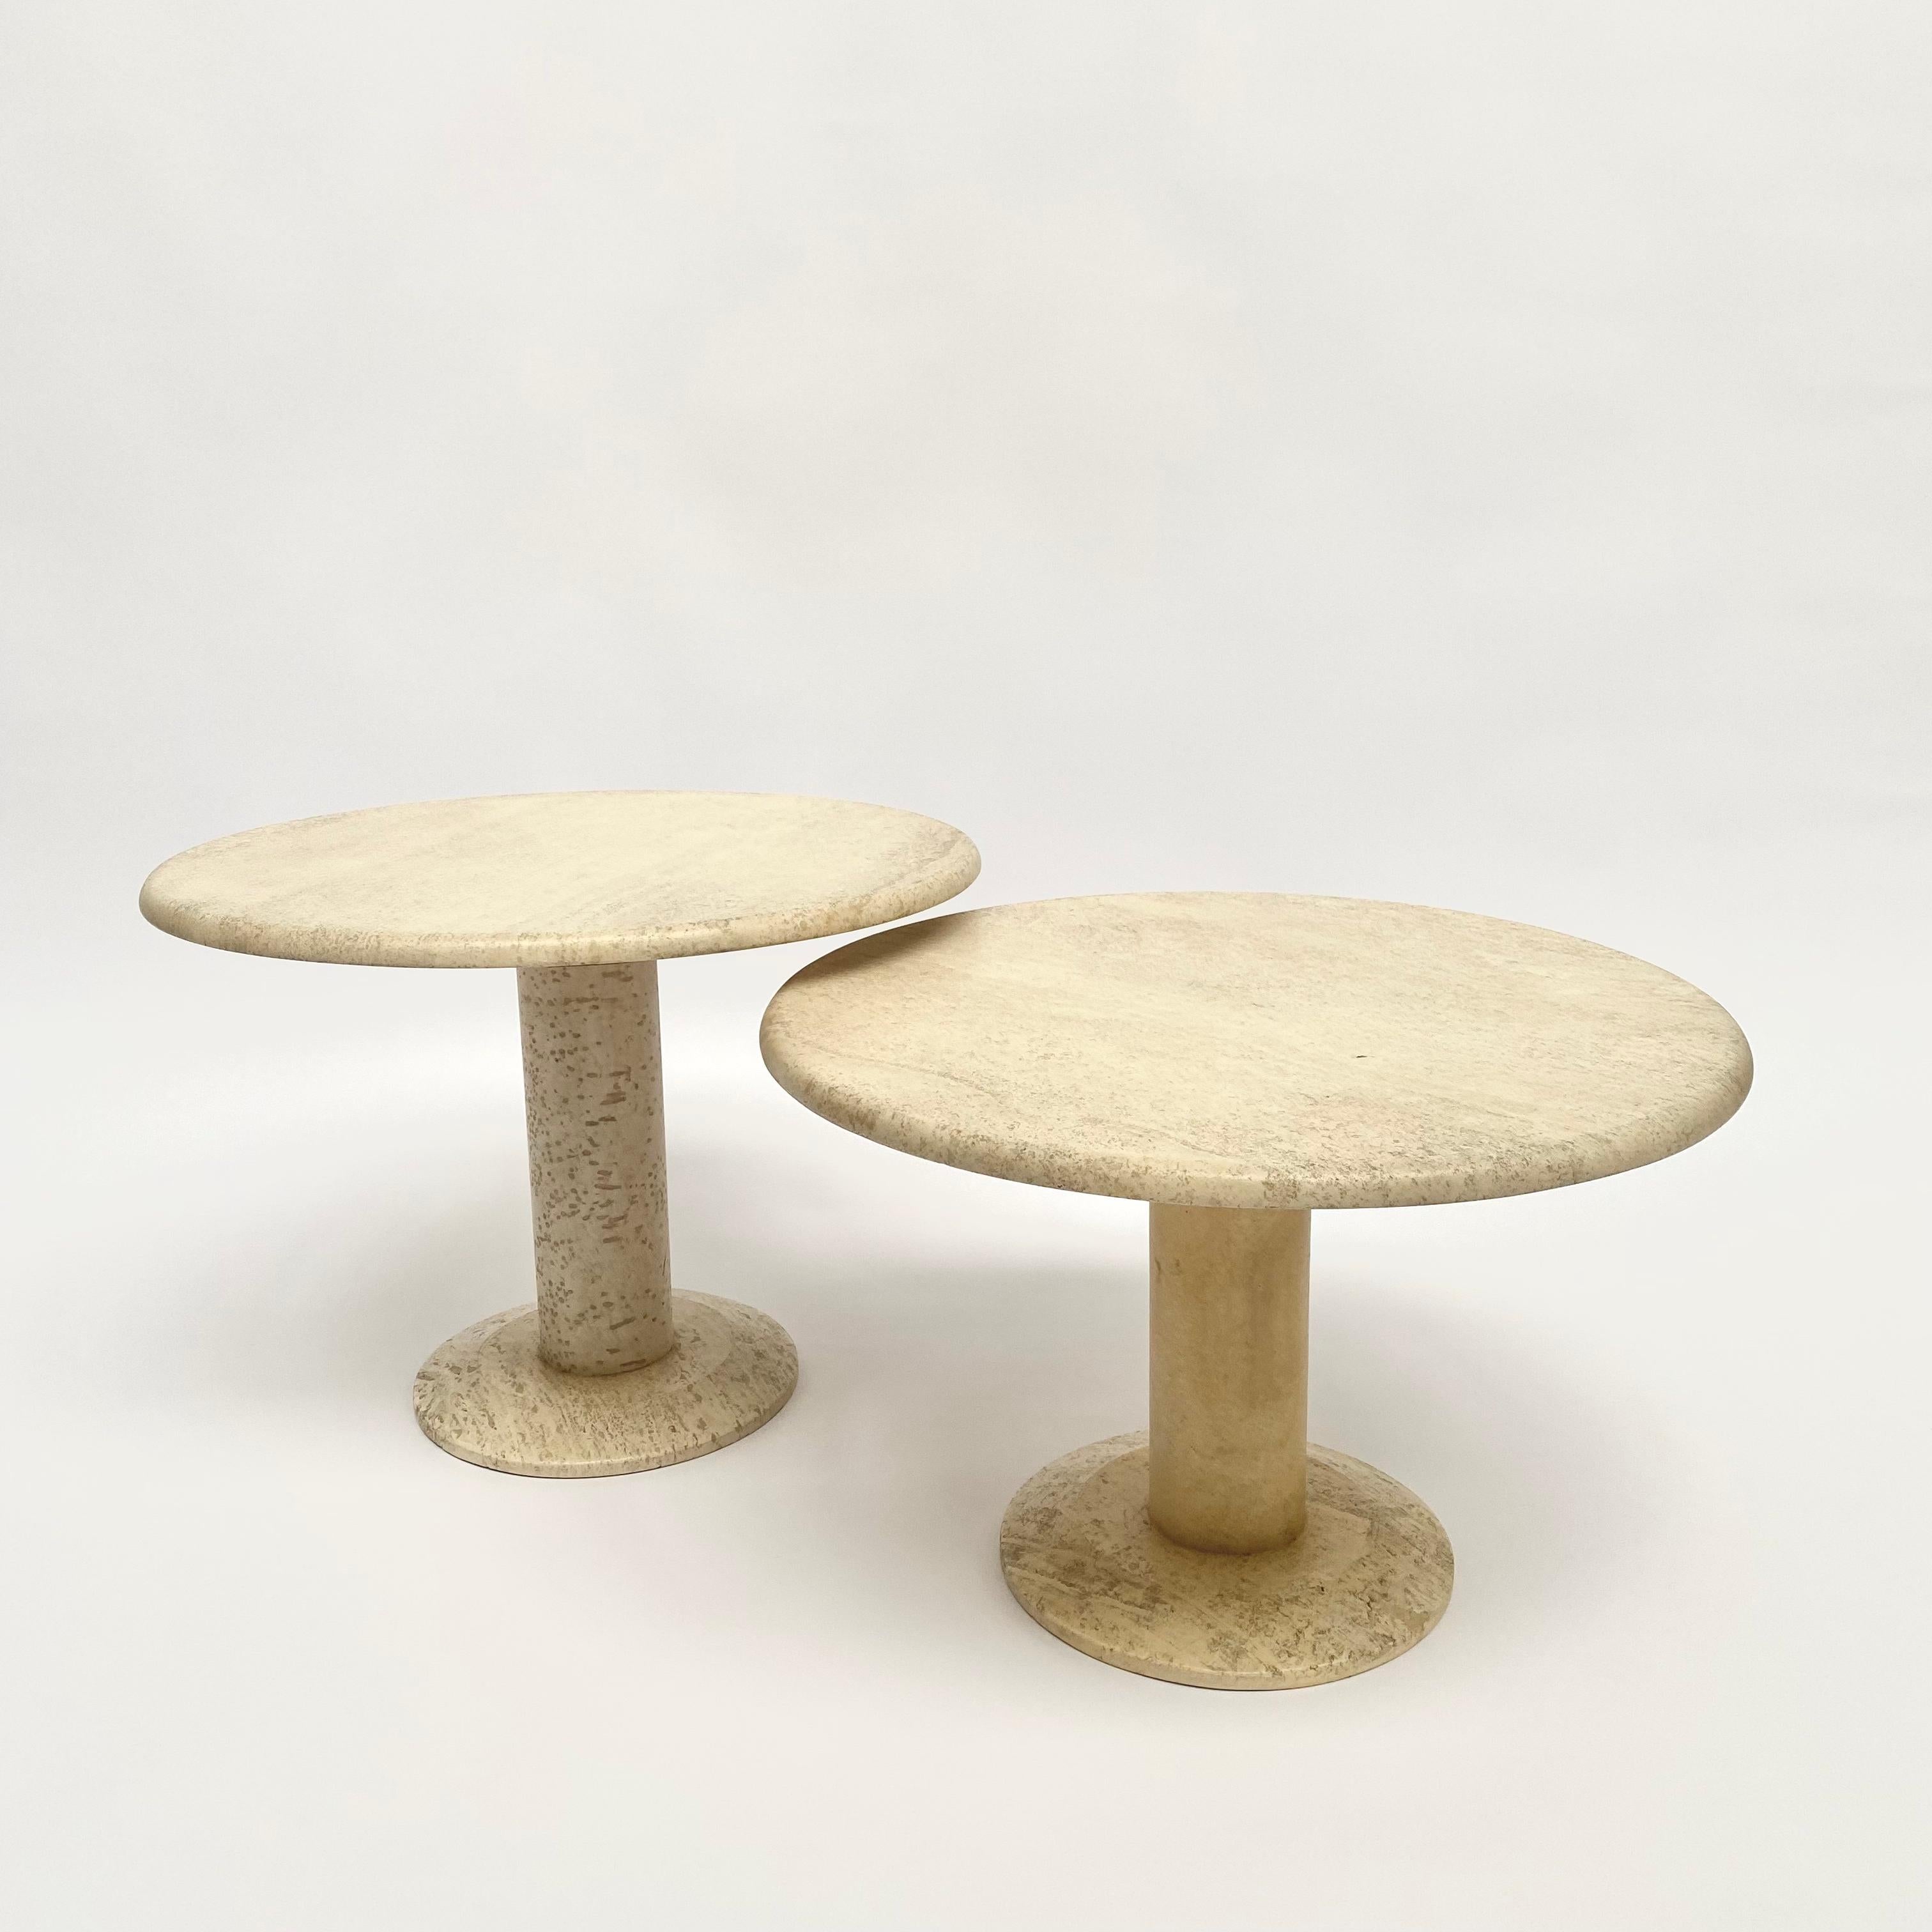 Coffee table set, travertine, Europe, 1970s. Beautiful coffee table completely executed in travertine. The base consists of round pedestal. With the bright natural material travertine, the characteristics of the limestone create a striking